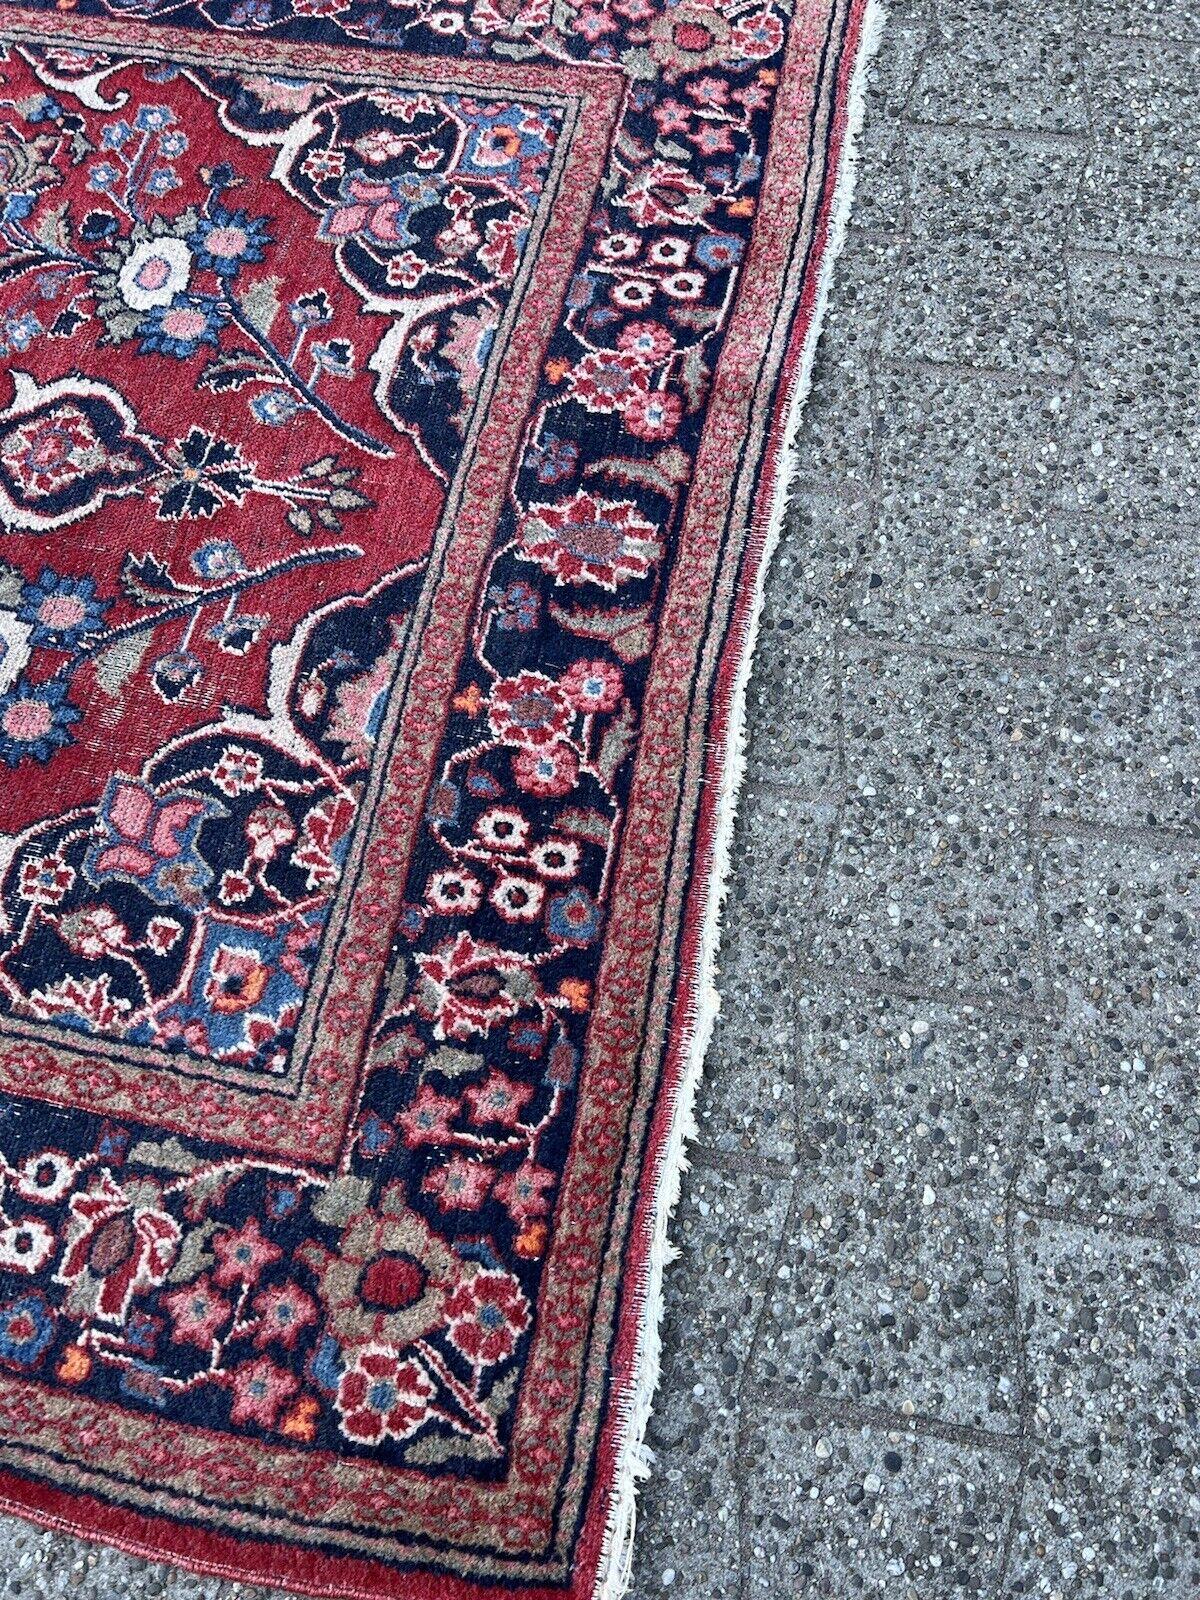 Handmade Antique Persian Style Kashan Rug 4.4' x 6.5', 1920s - 1S43 For Sale 2